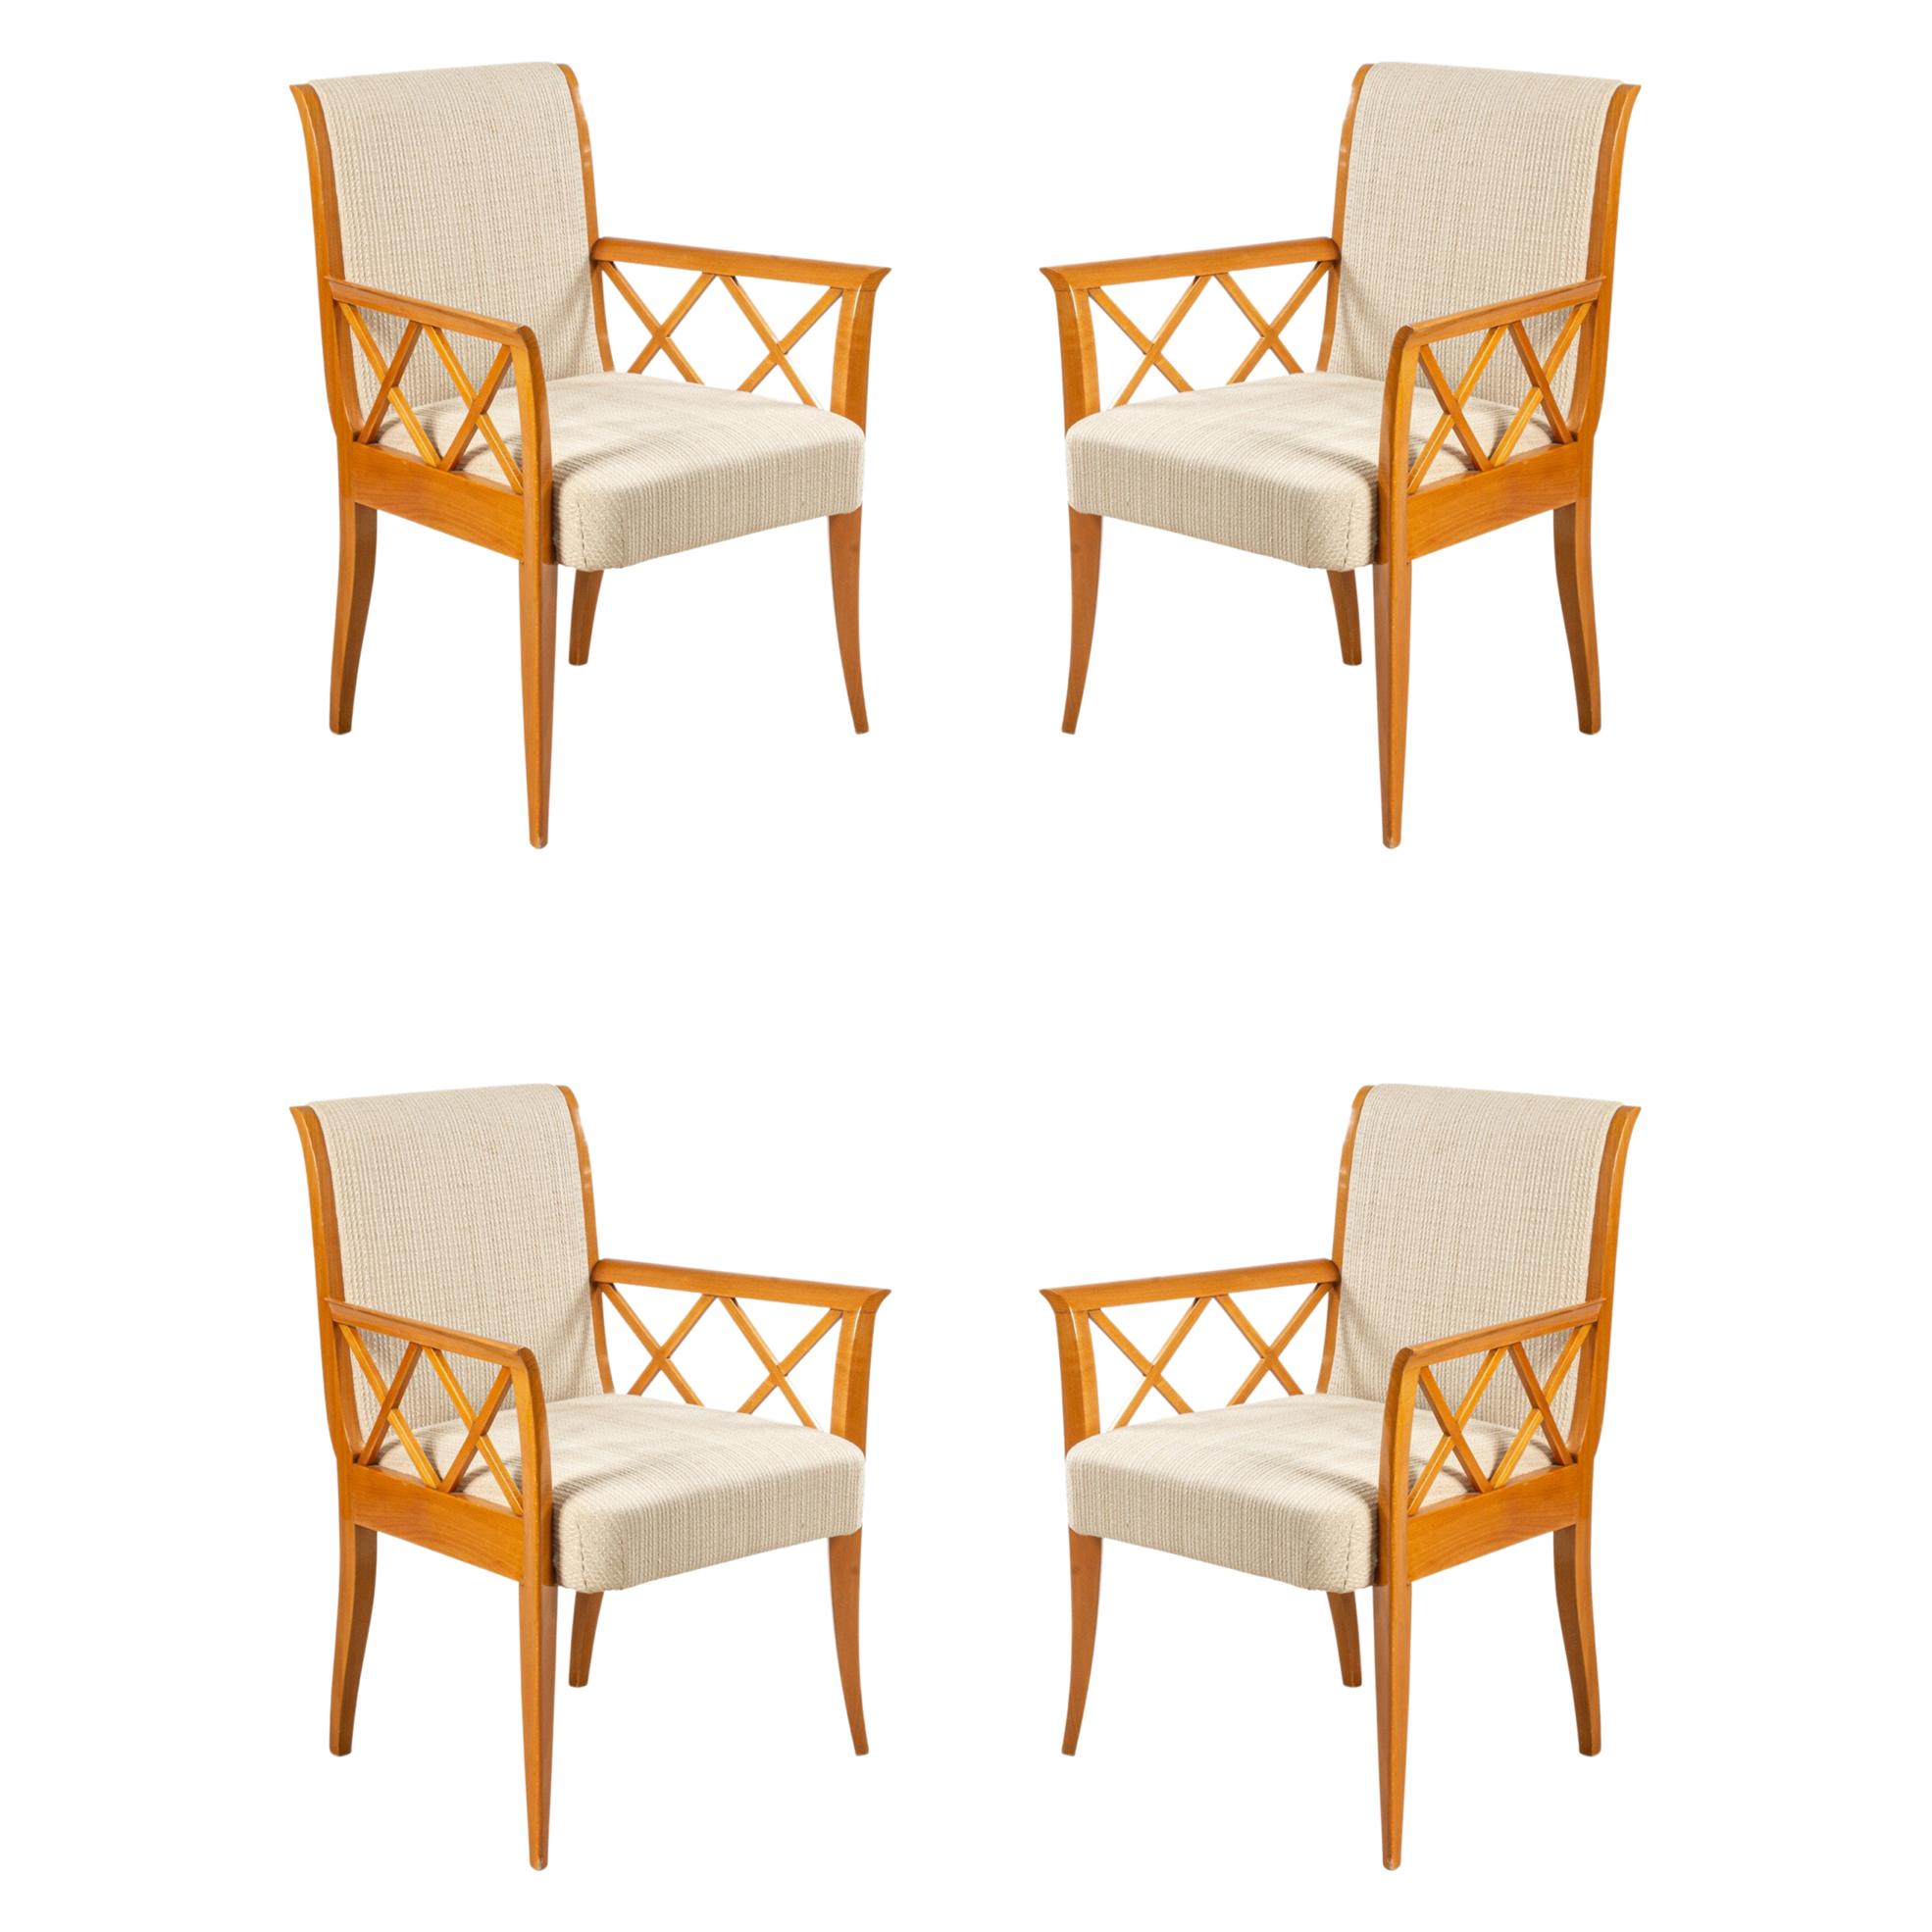 Set of 4 French Maple Lattice Arm Chairs